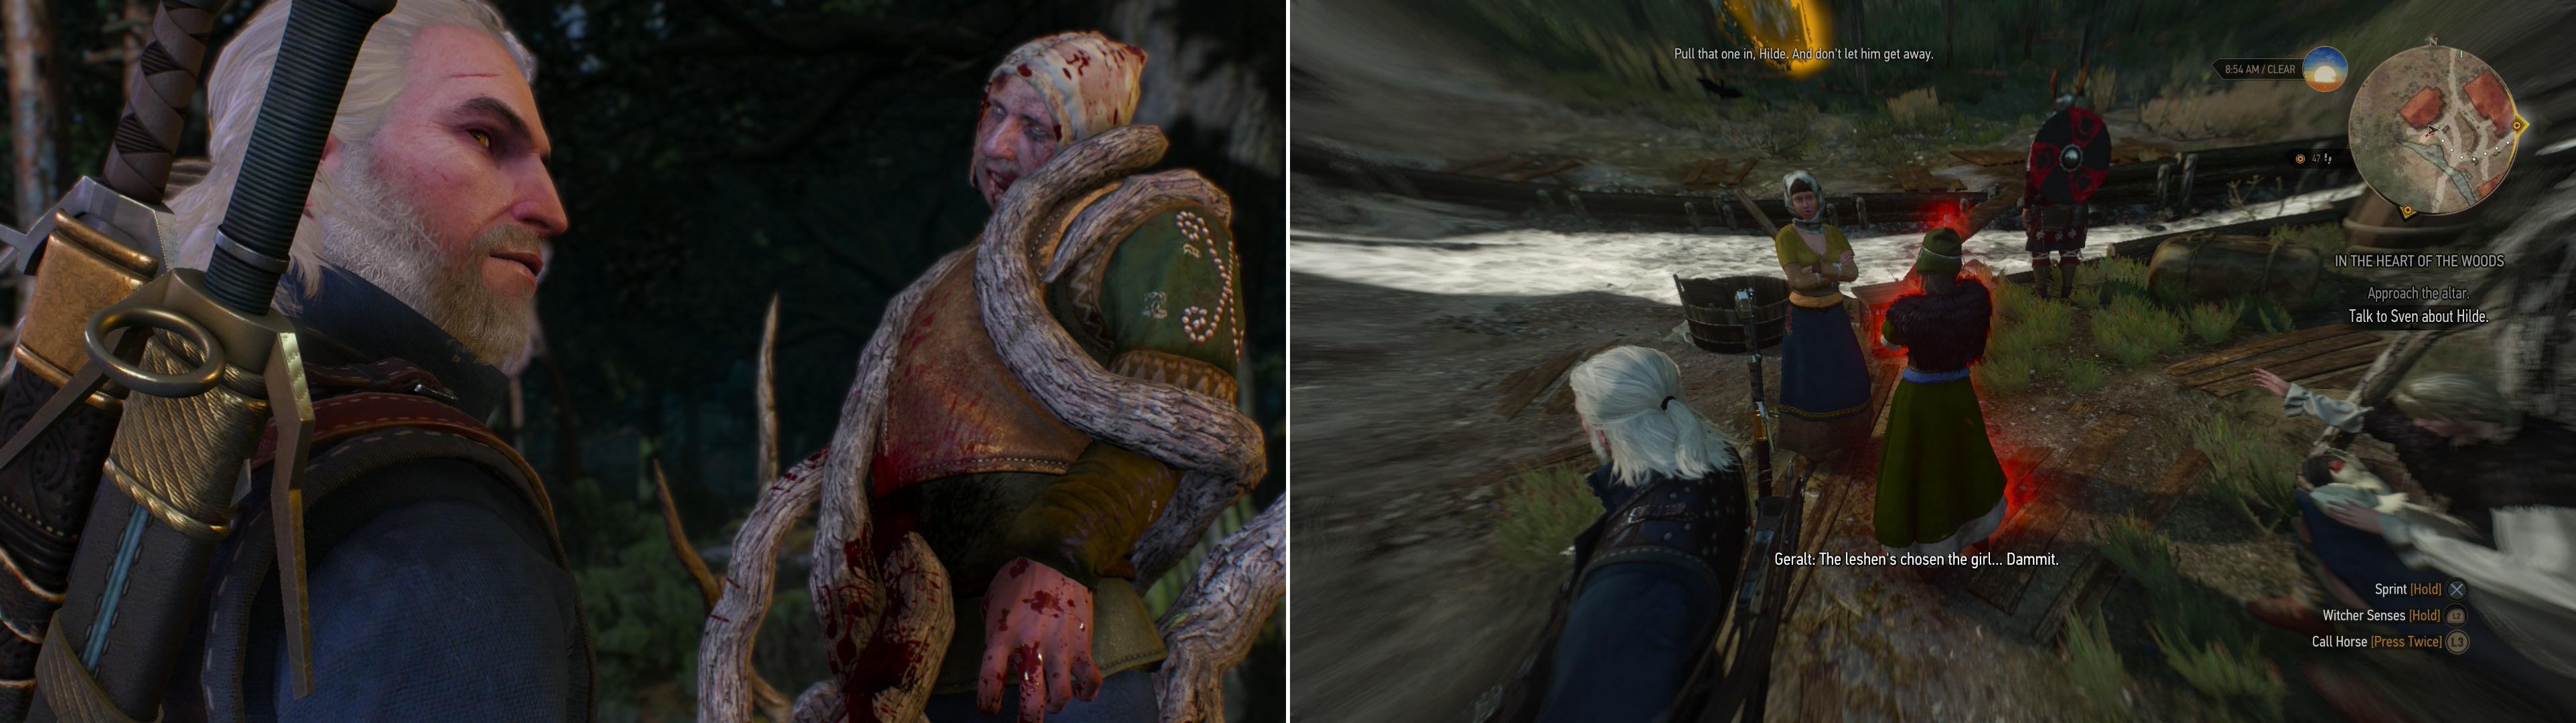 Looks like Witcher’s Work (left). Track down the villager marked by the monster (right).